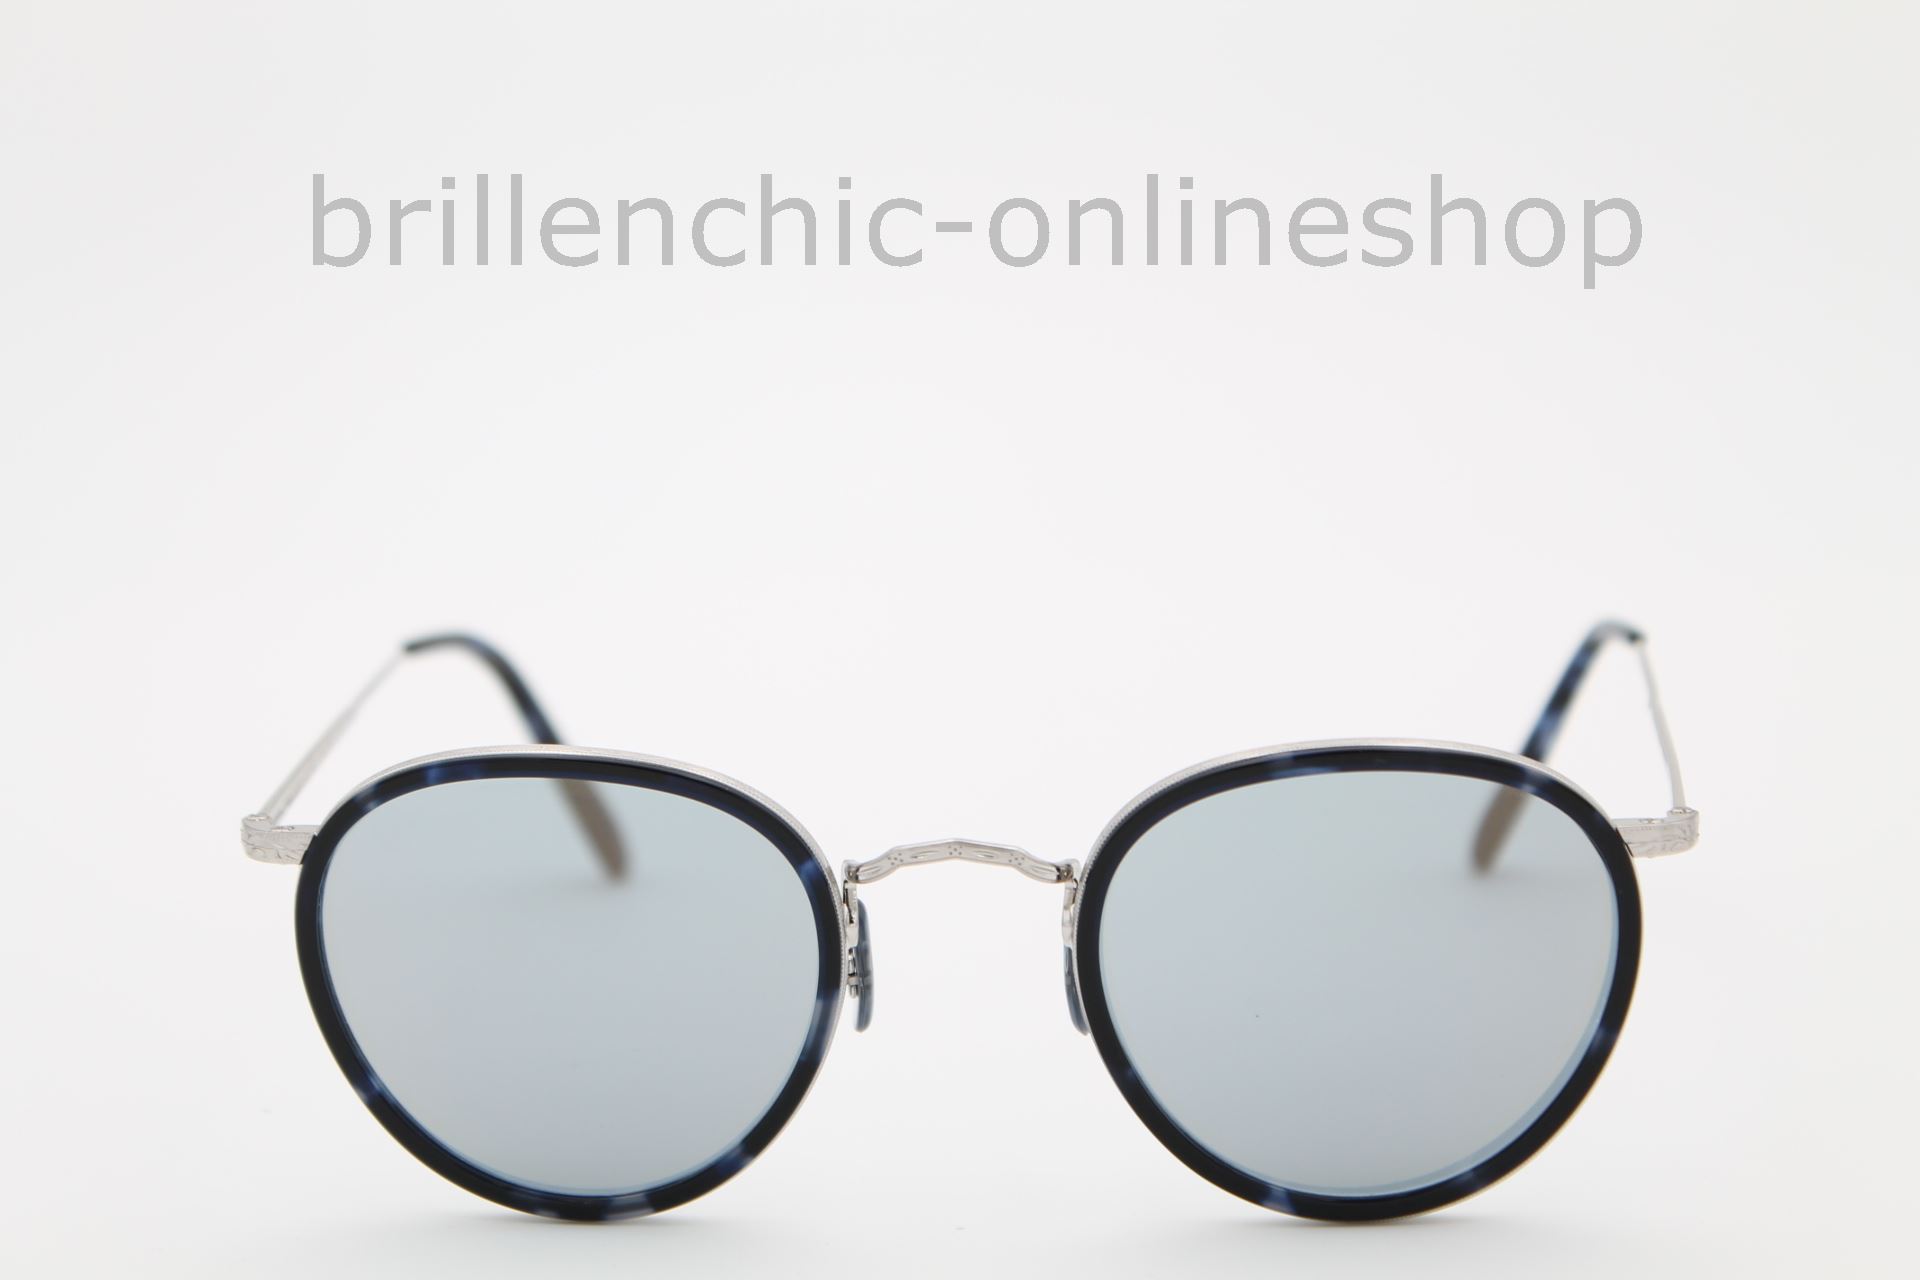 Brillenchic Onlineshop In Berlin Oliver Peoples Mp 2 Sun Ov 1104s 1104 5063 Y5 New